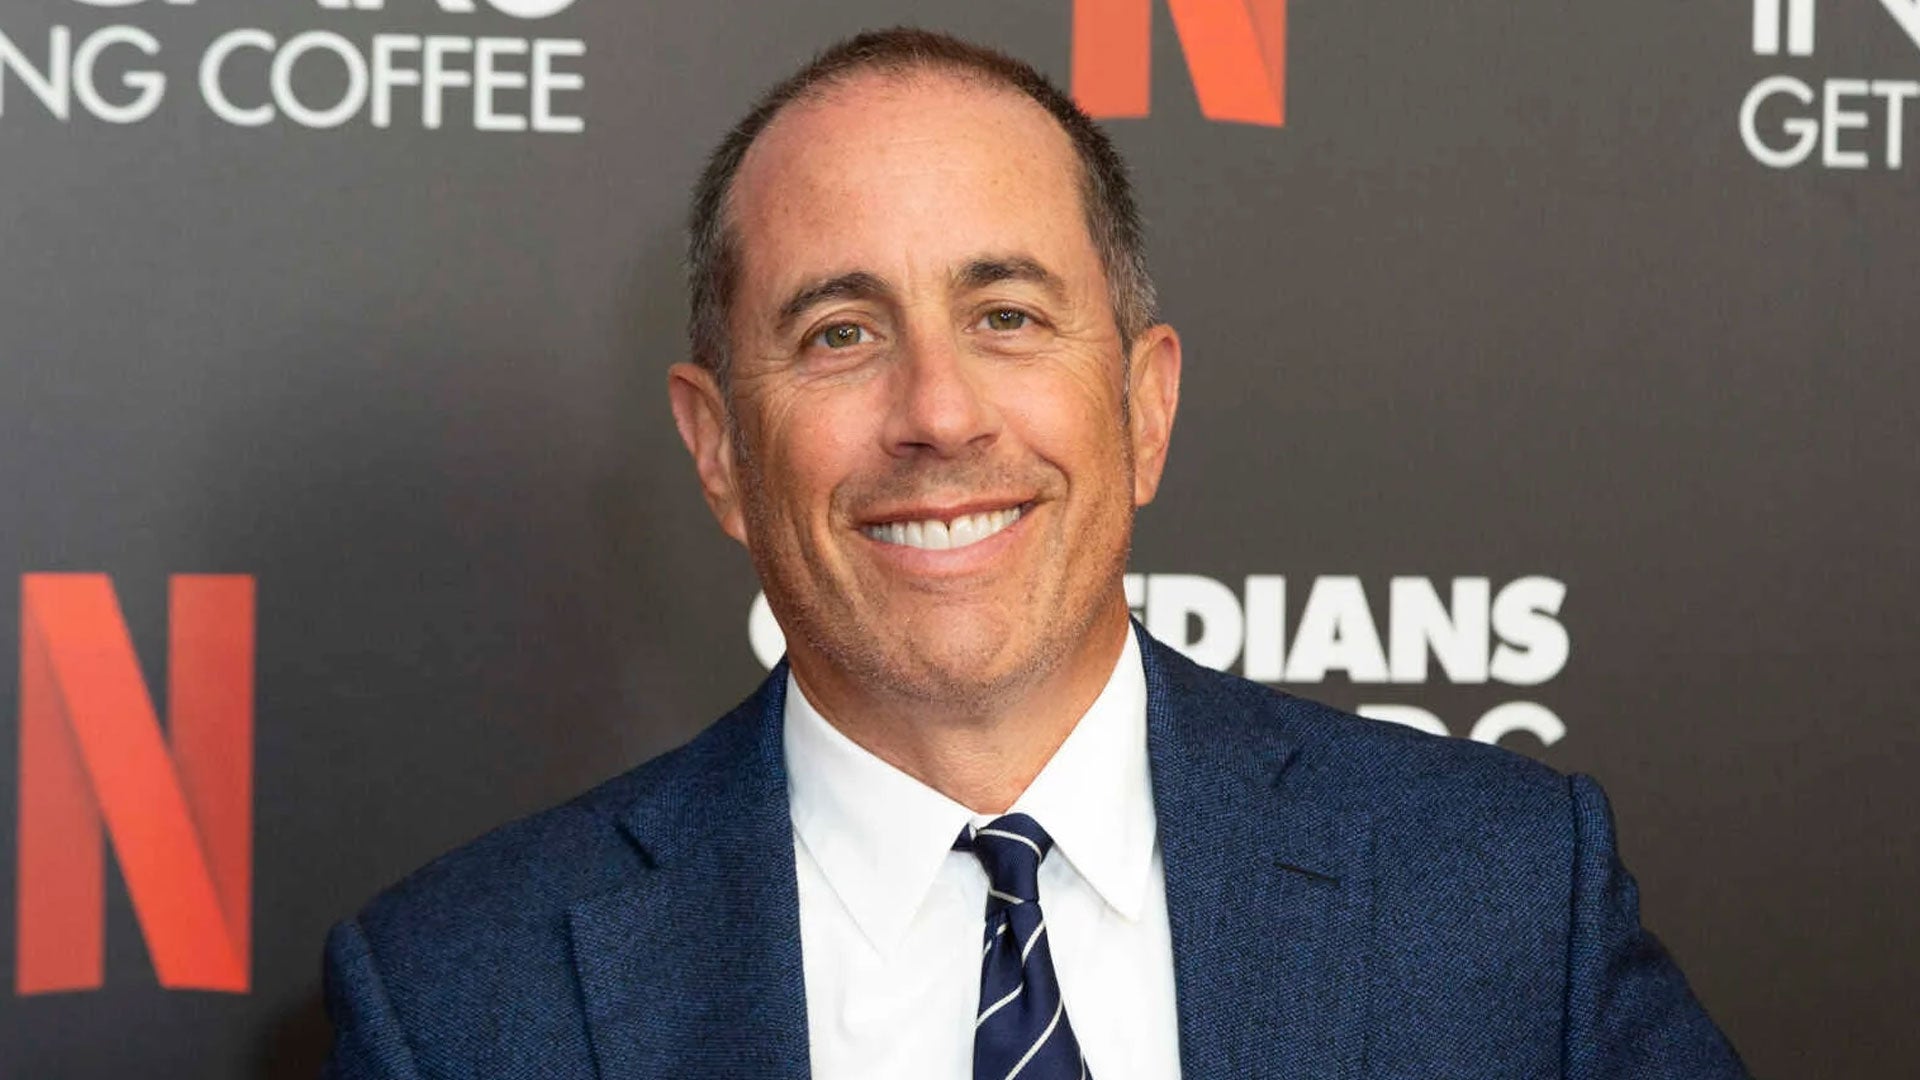 'Bring Them Home': Jerry Seinfeld Visits Israel, Meets With Freed Hostages, Families